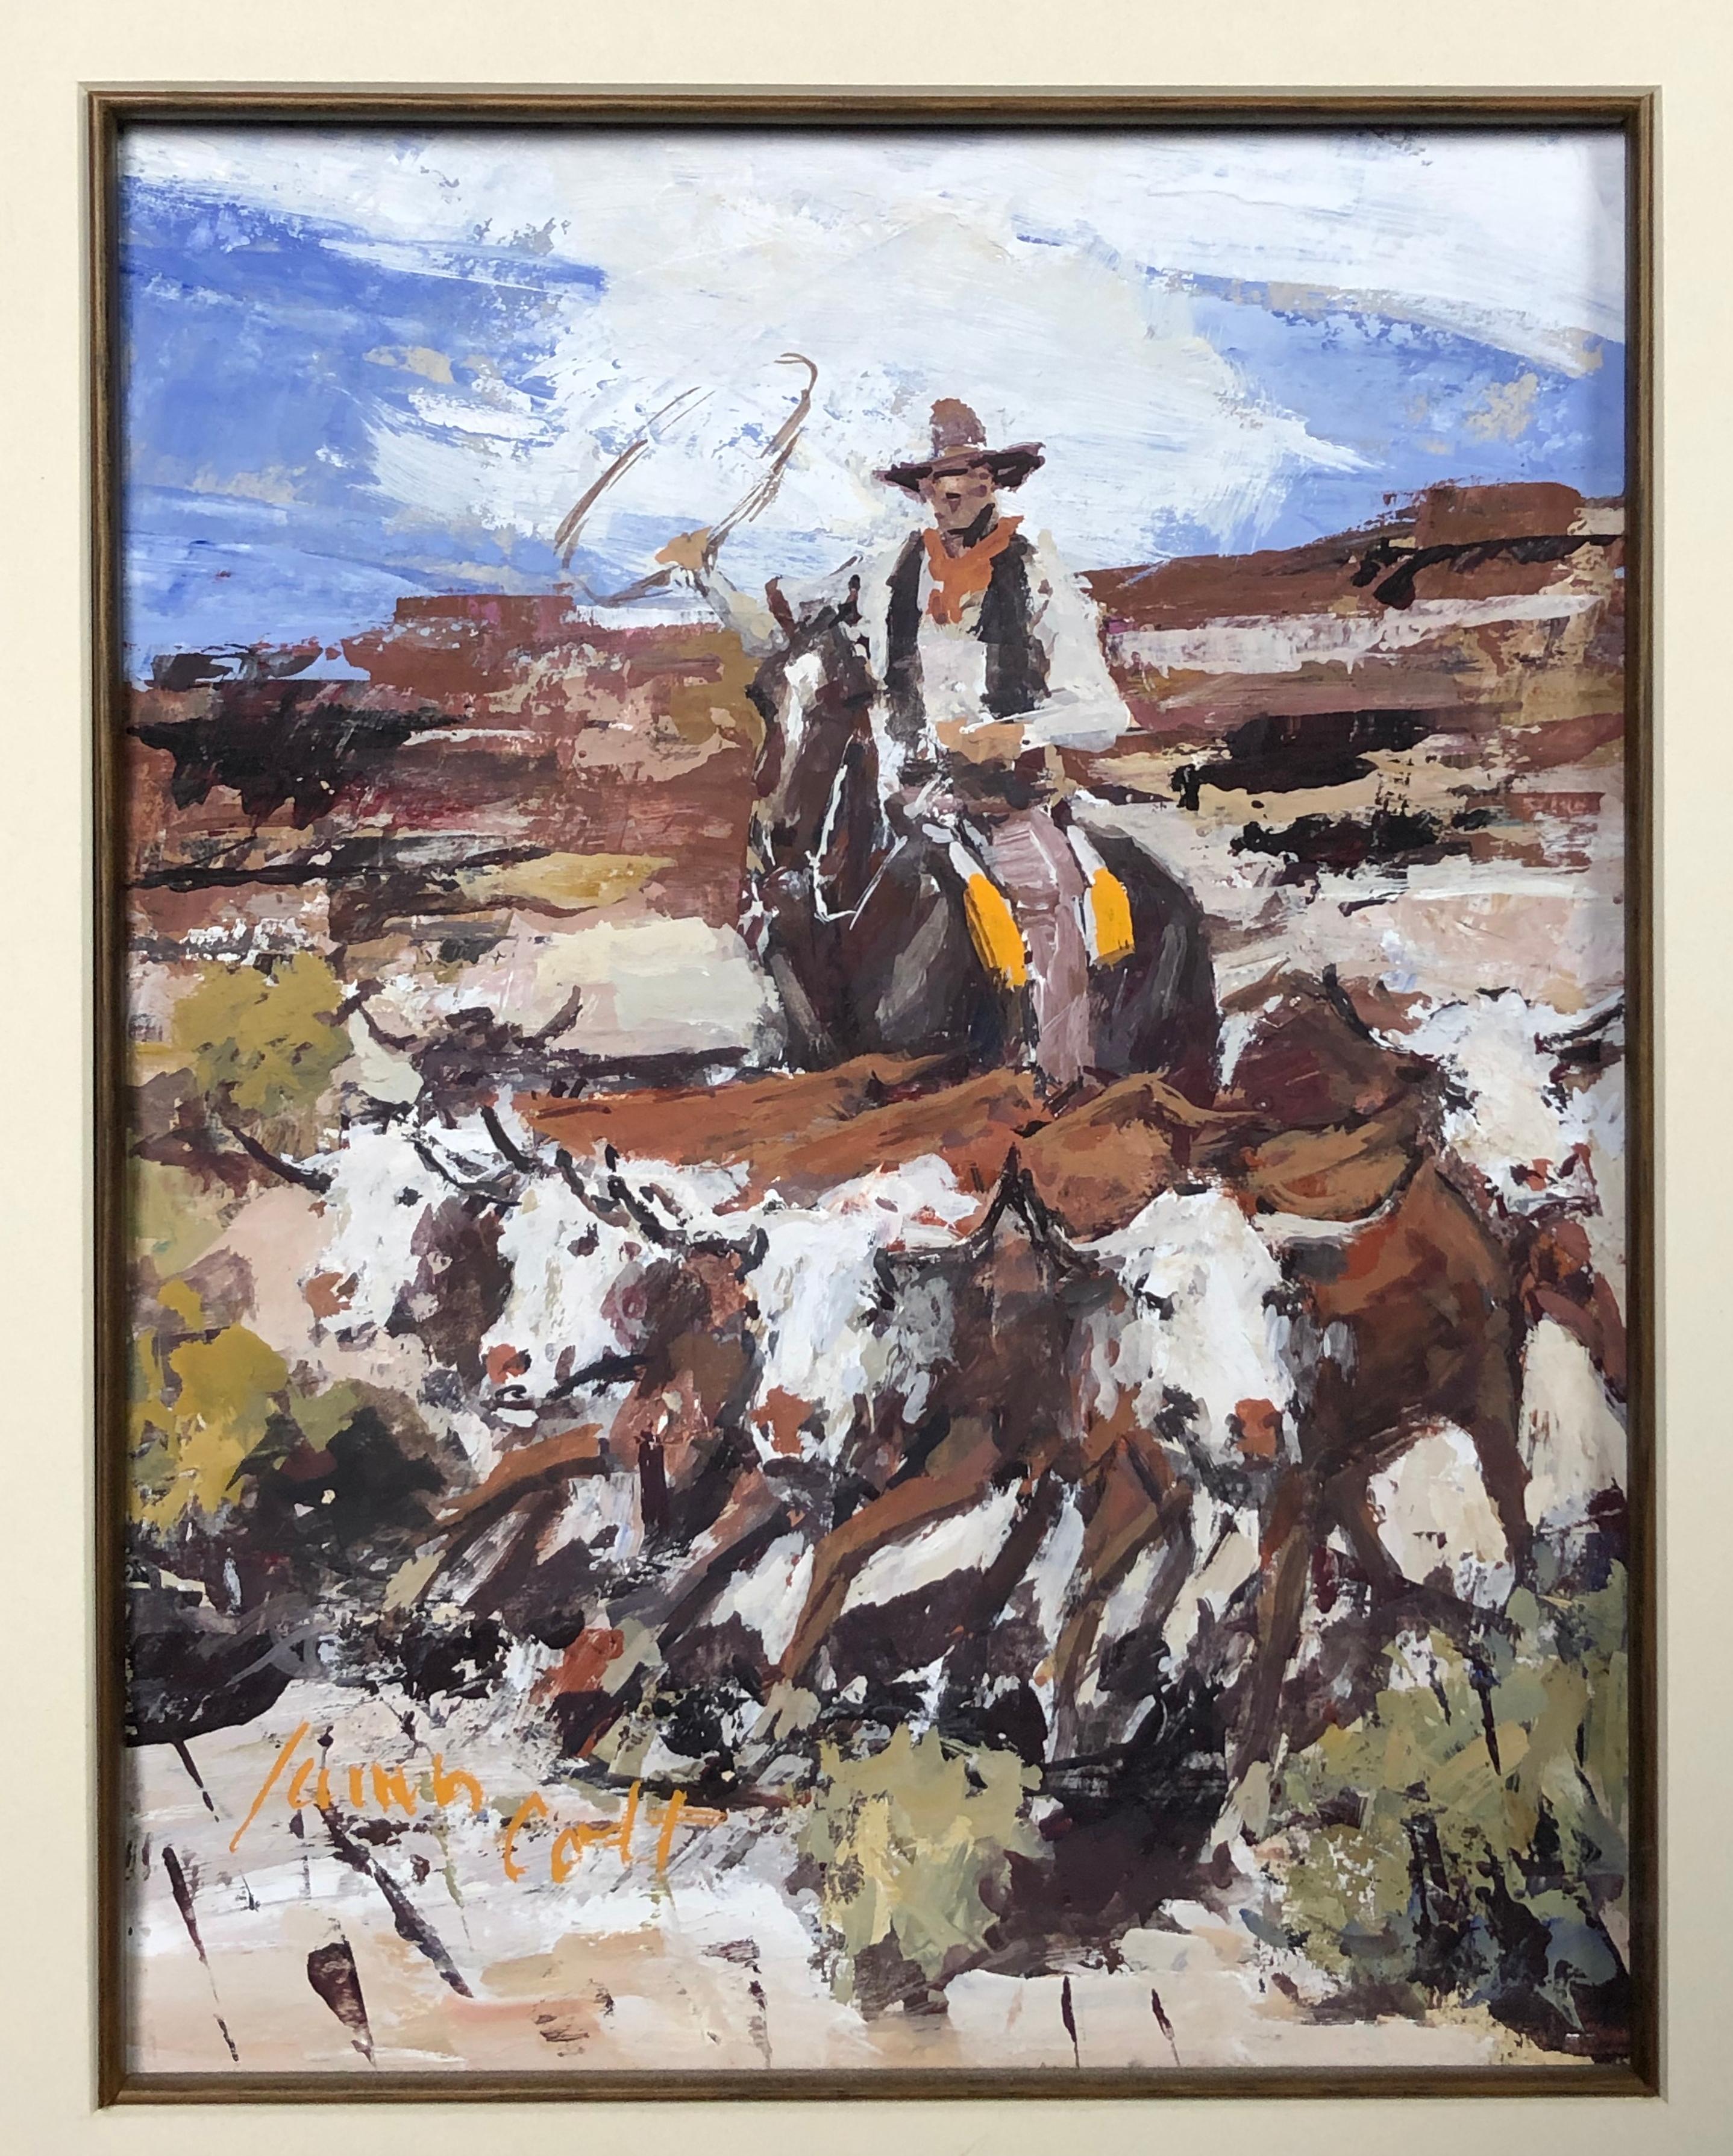 Watercolor gouache by American Western artist James Lee Colt (1922 - 2005 Palm Springs, CA)
Original signed gouache watercolor painting featuring cowboy scene by Western Artist James Colt. 
Cowboy on horse following cattle. 
Signed lower left. 
Back